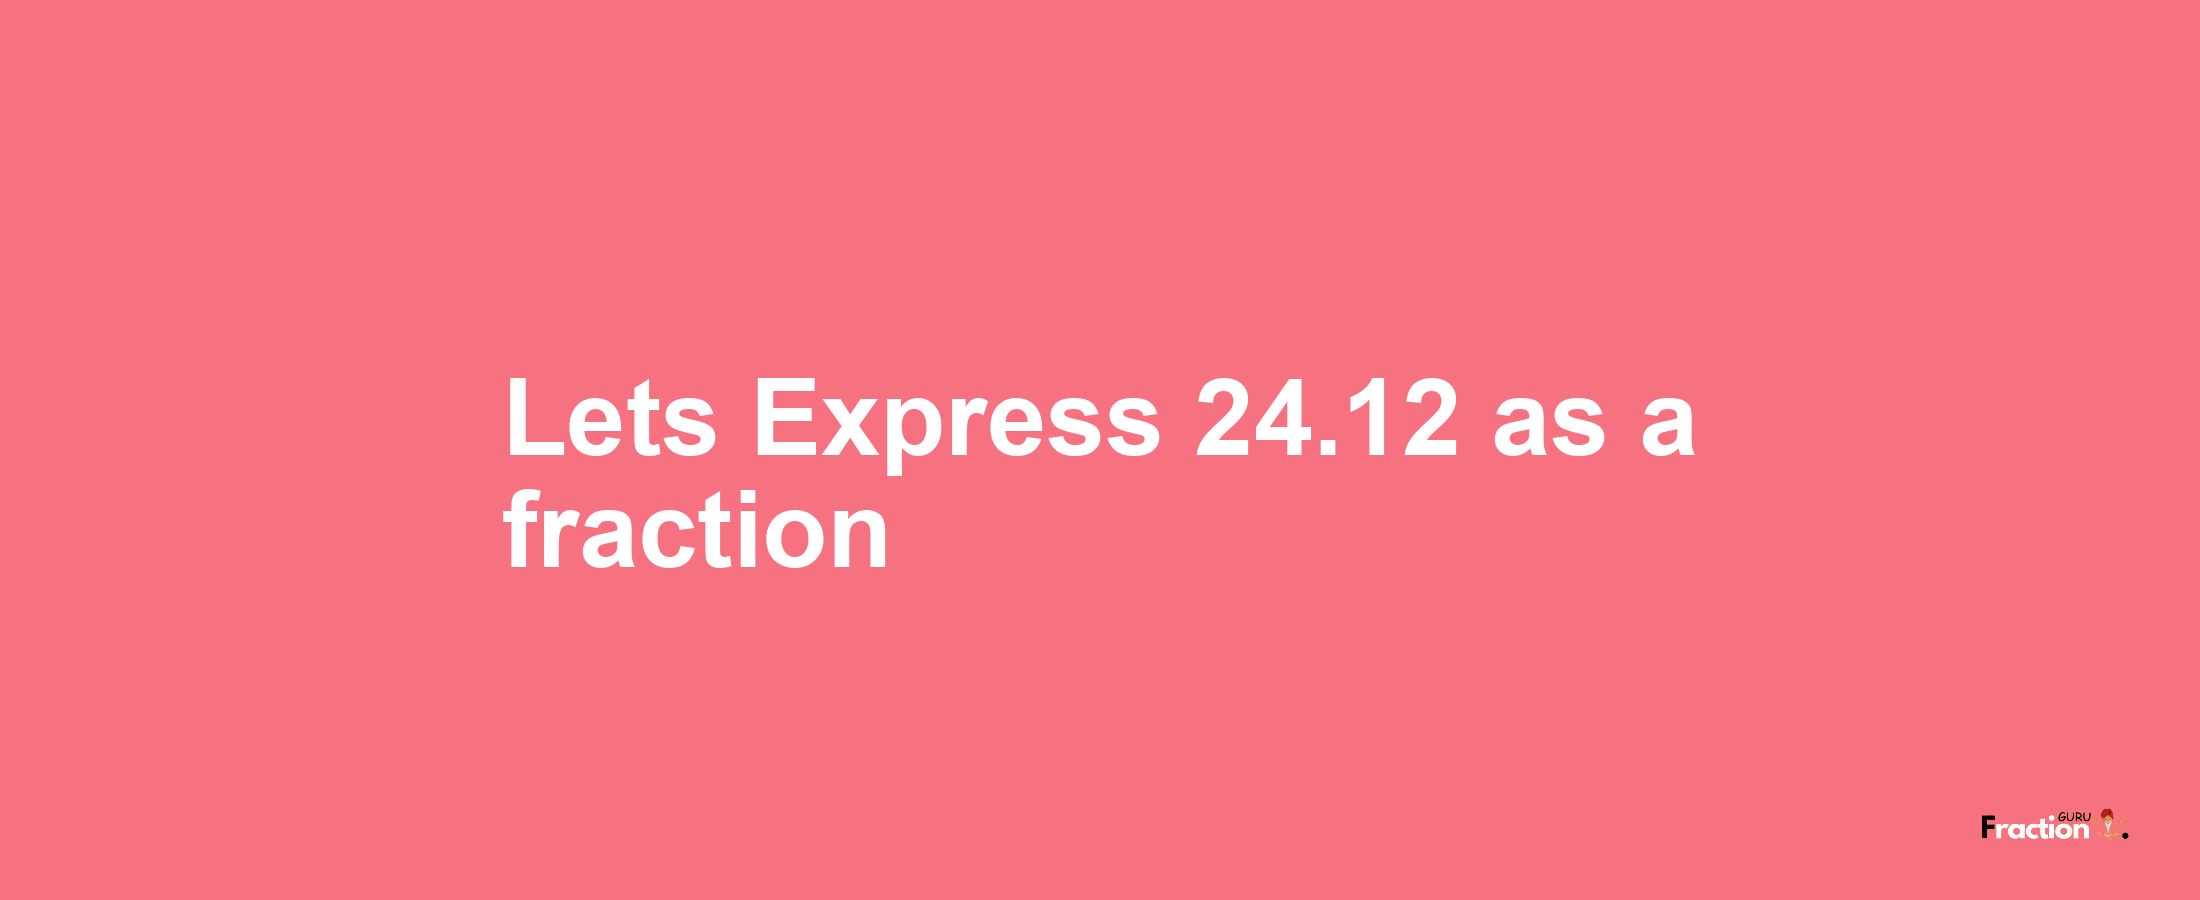 Lets Express 24.12 as afraction